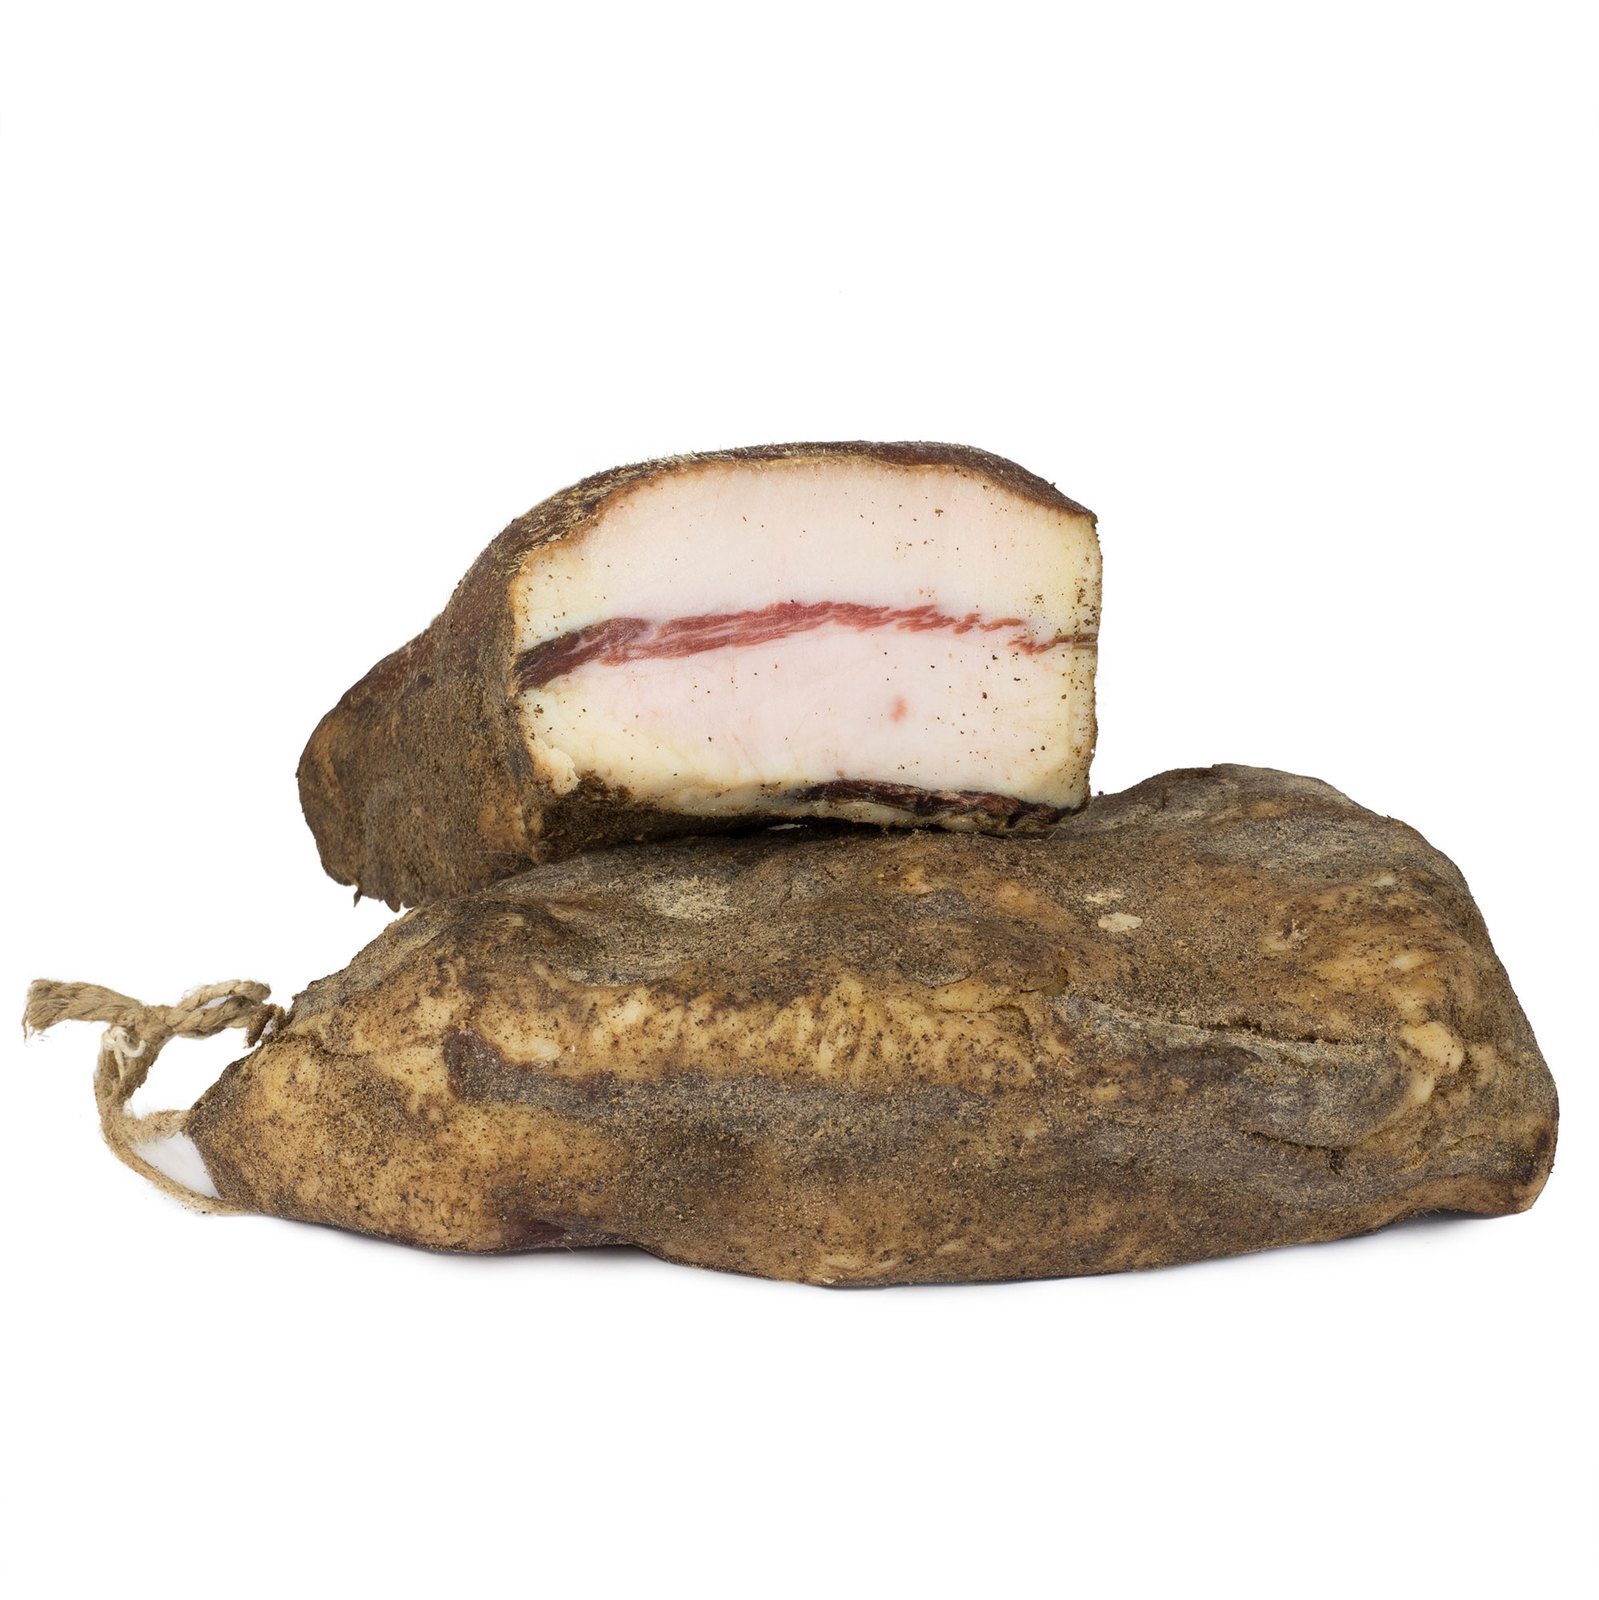 Cured guanciale (cured pork cheek) whole piece